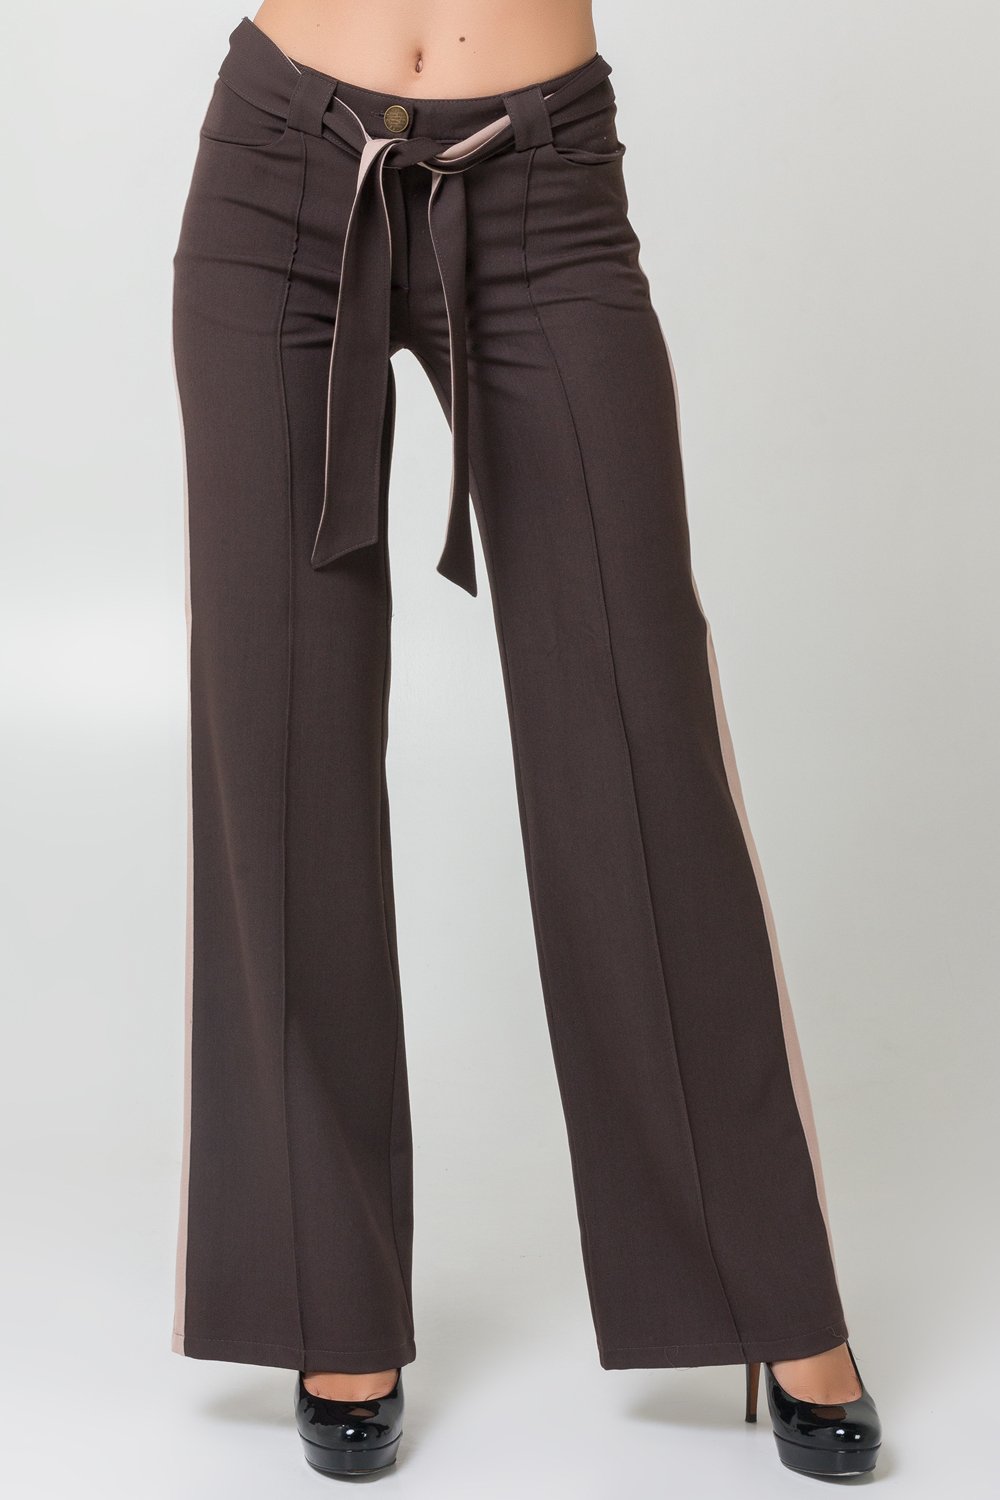 Tube trousers in khaki color with stripes